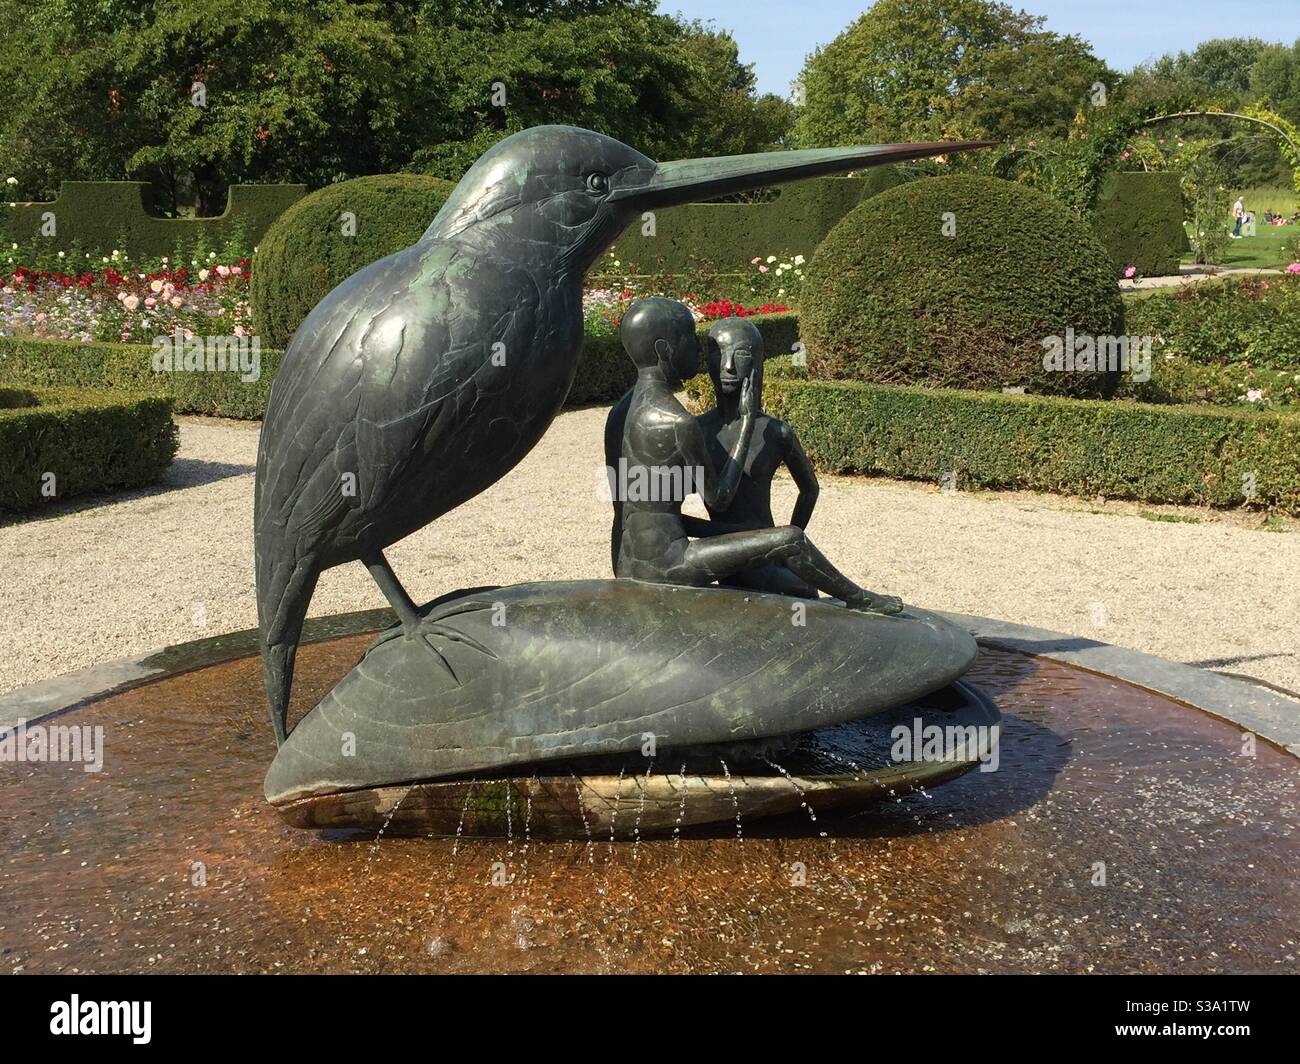 Fountain sculpture of oversized bird with 2 figures sitting on a mussel shell with topiary in the background Stock Photo